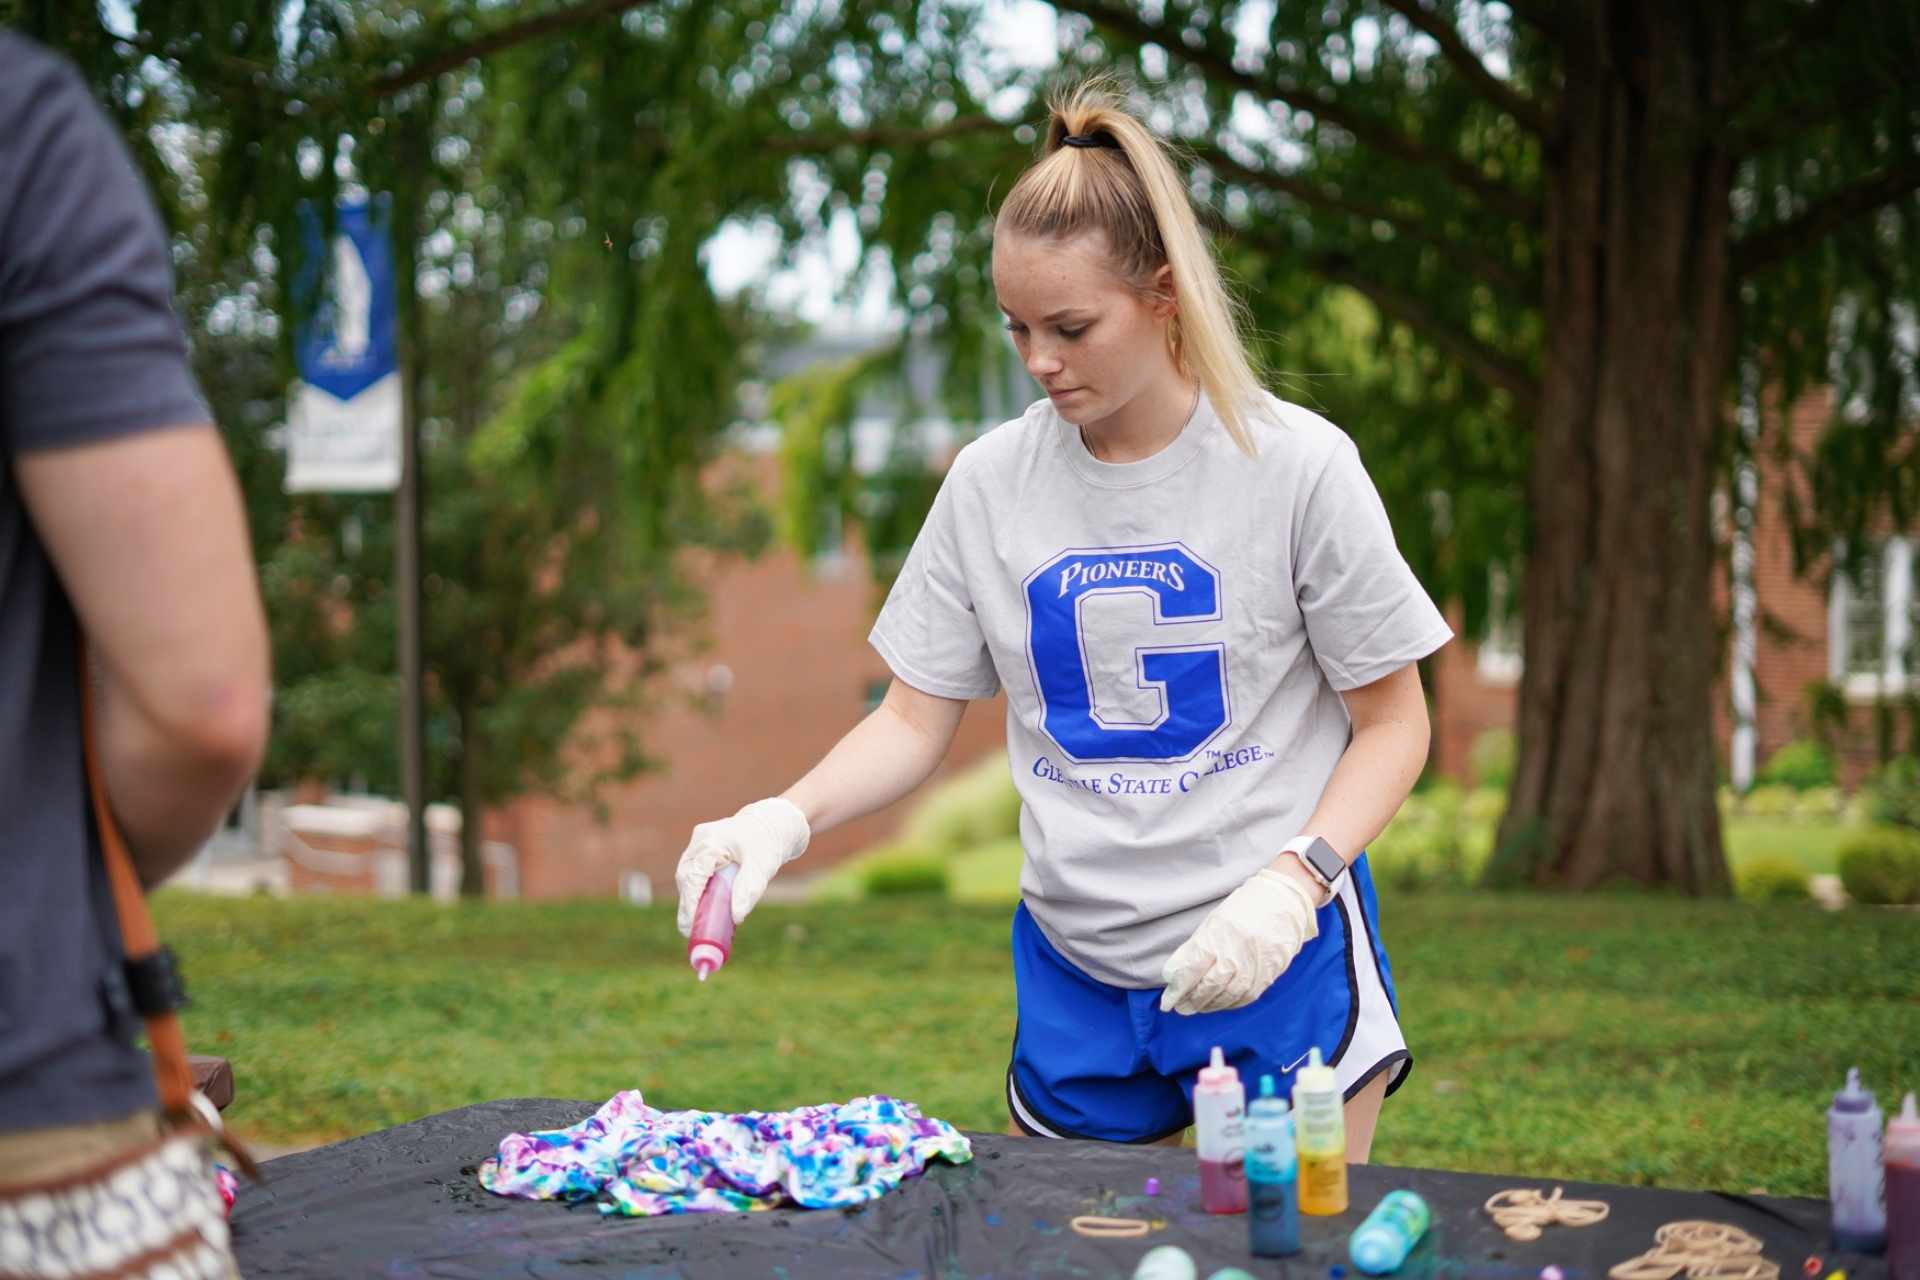 New Glenville State College students took part in several activities during their weeklong orientation, including making custom tie-dye t-shirts.